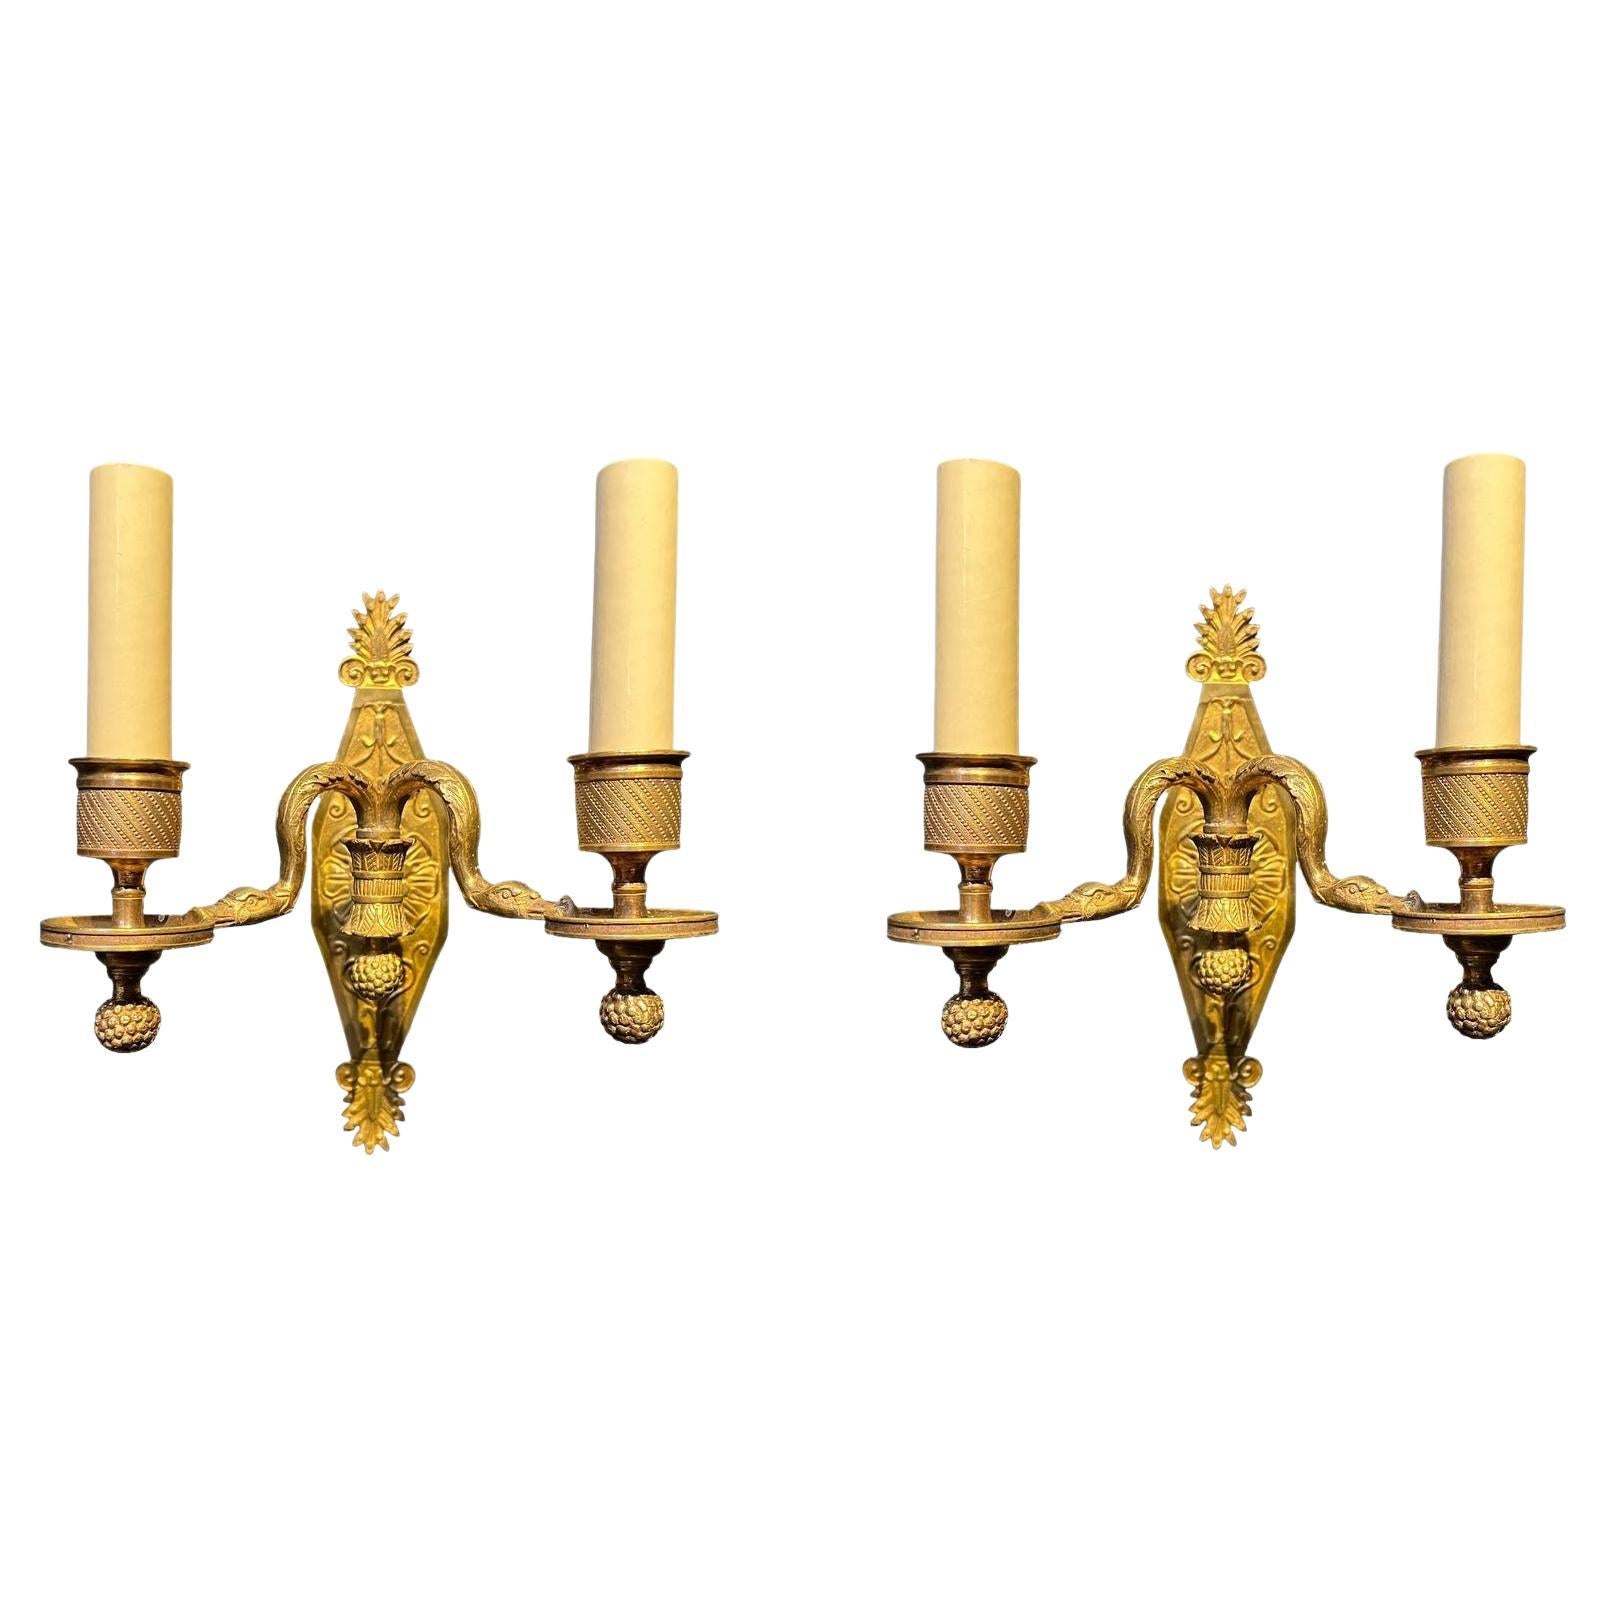 Pair of 1900's French Empire Sconces